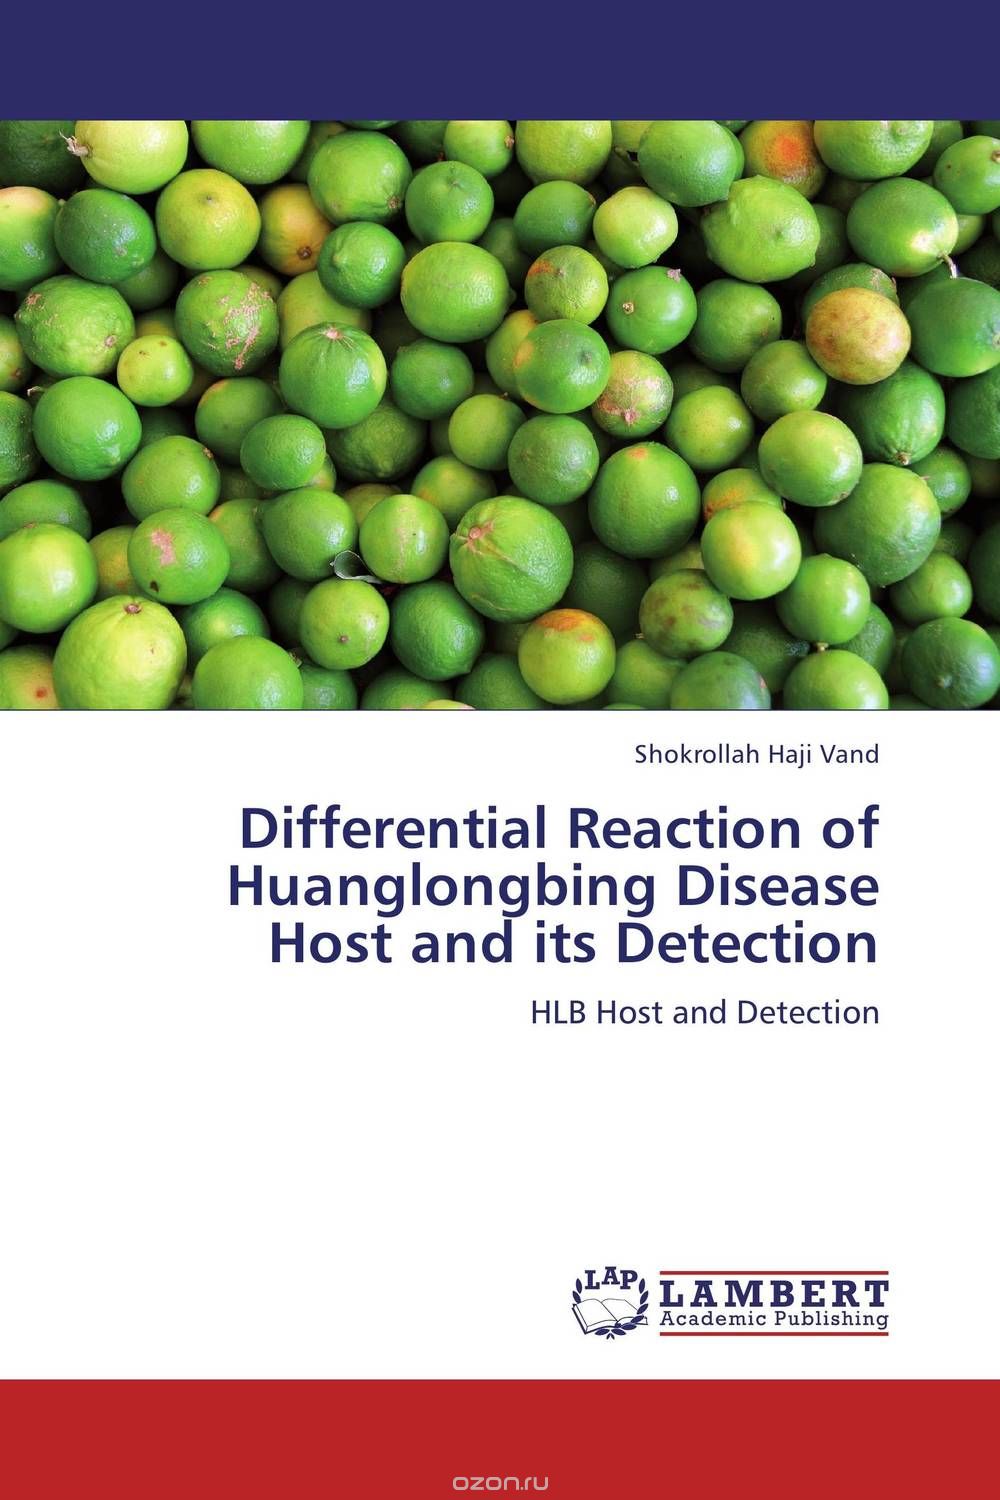 Скачать книгу "Differential Reaction of Huanglongbing Disease Host and its Detection"